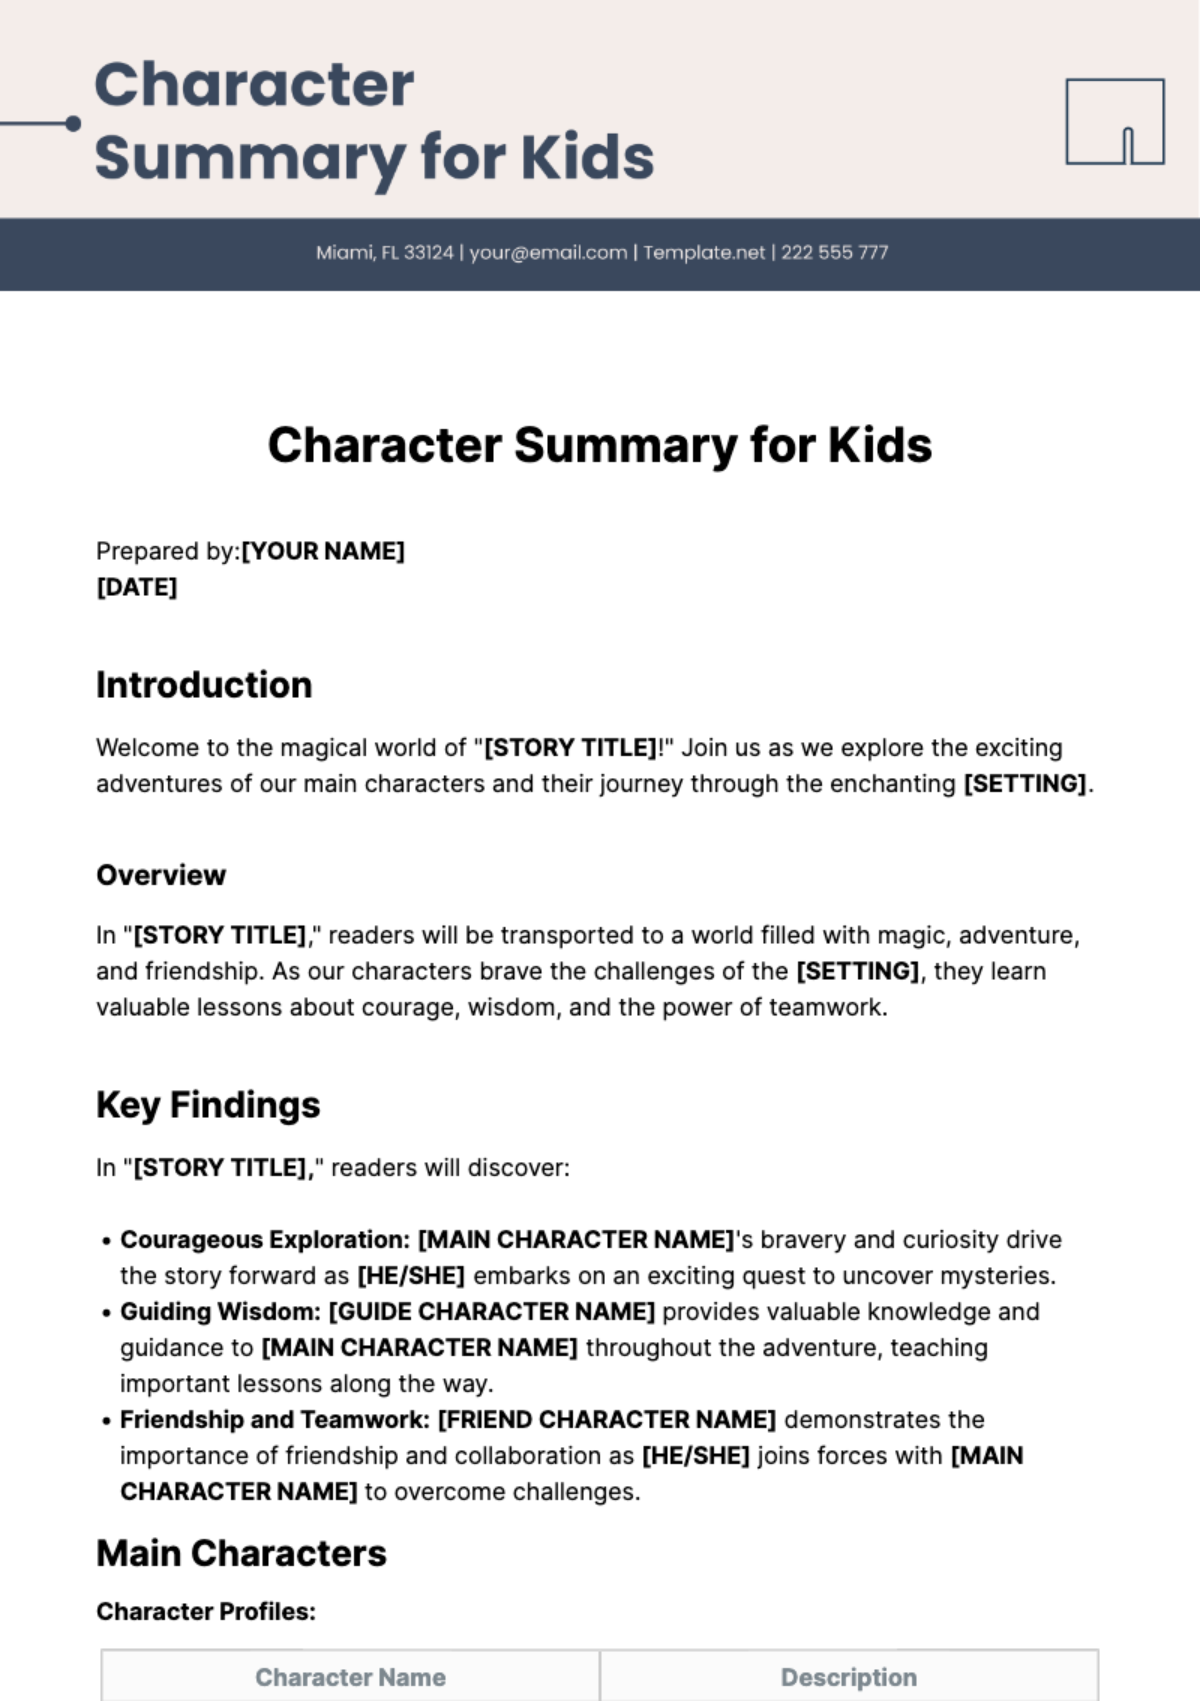 Character Summary for Kids Template